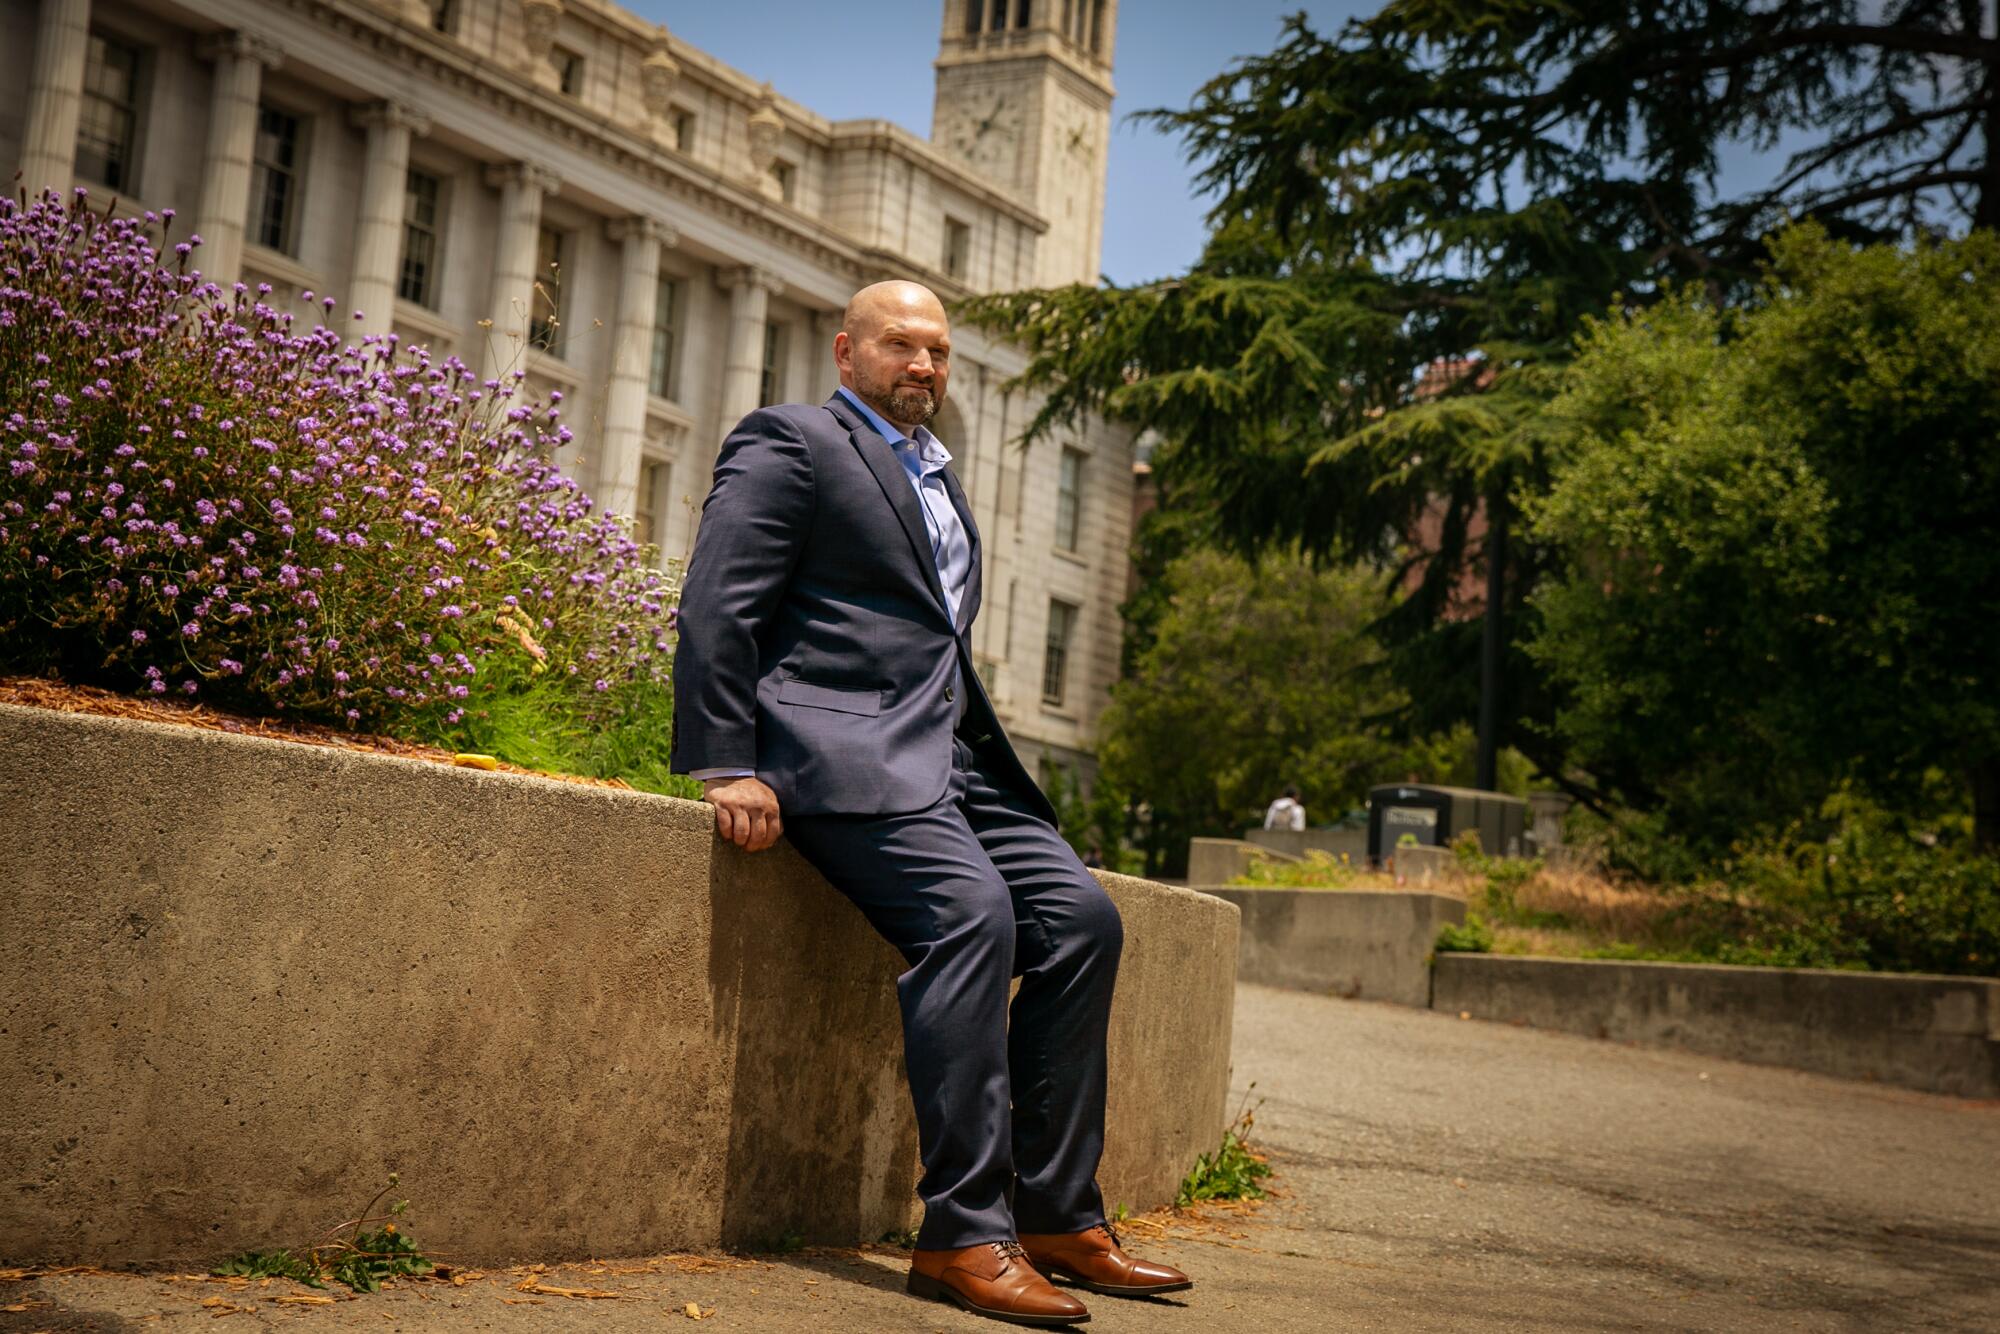 Kevin McCarthy poses in a suit on the UC Berkeley campus.